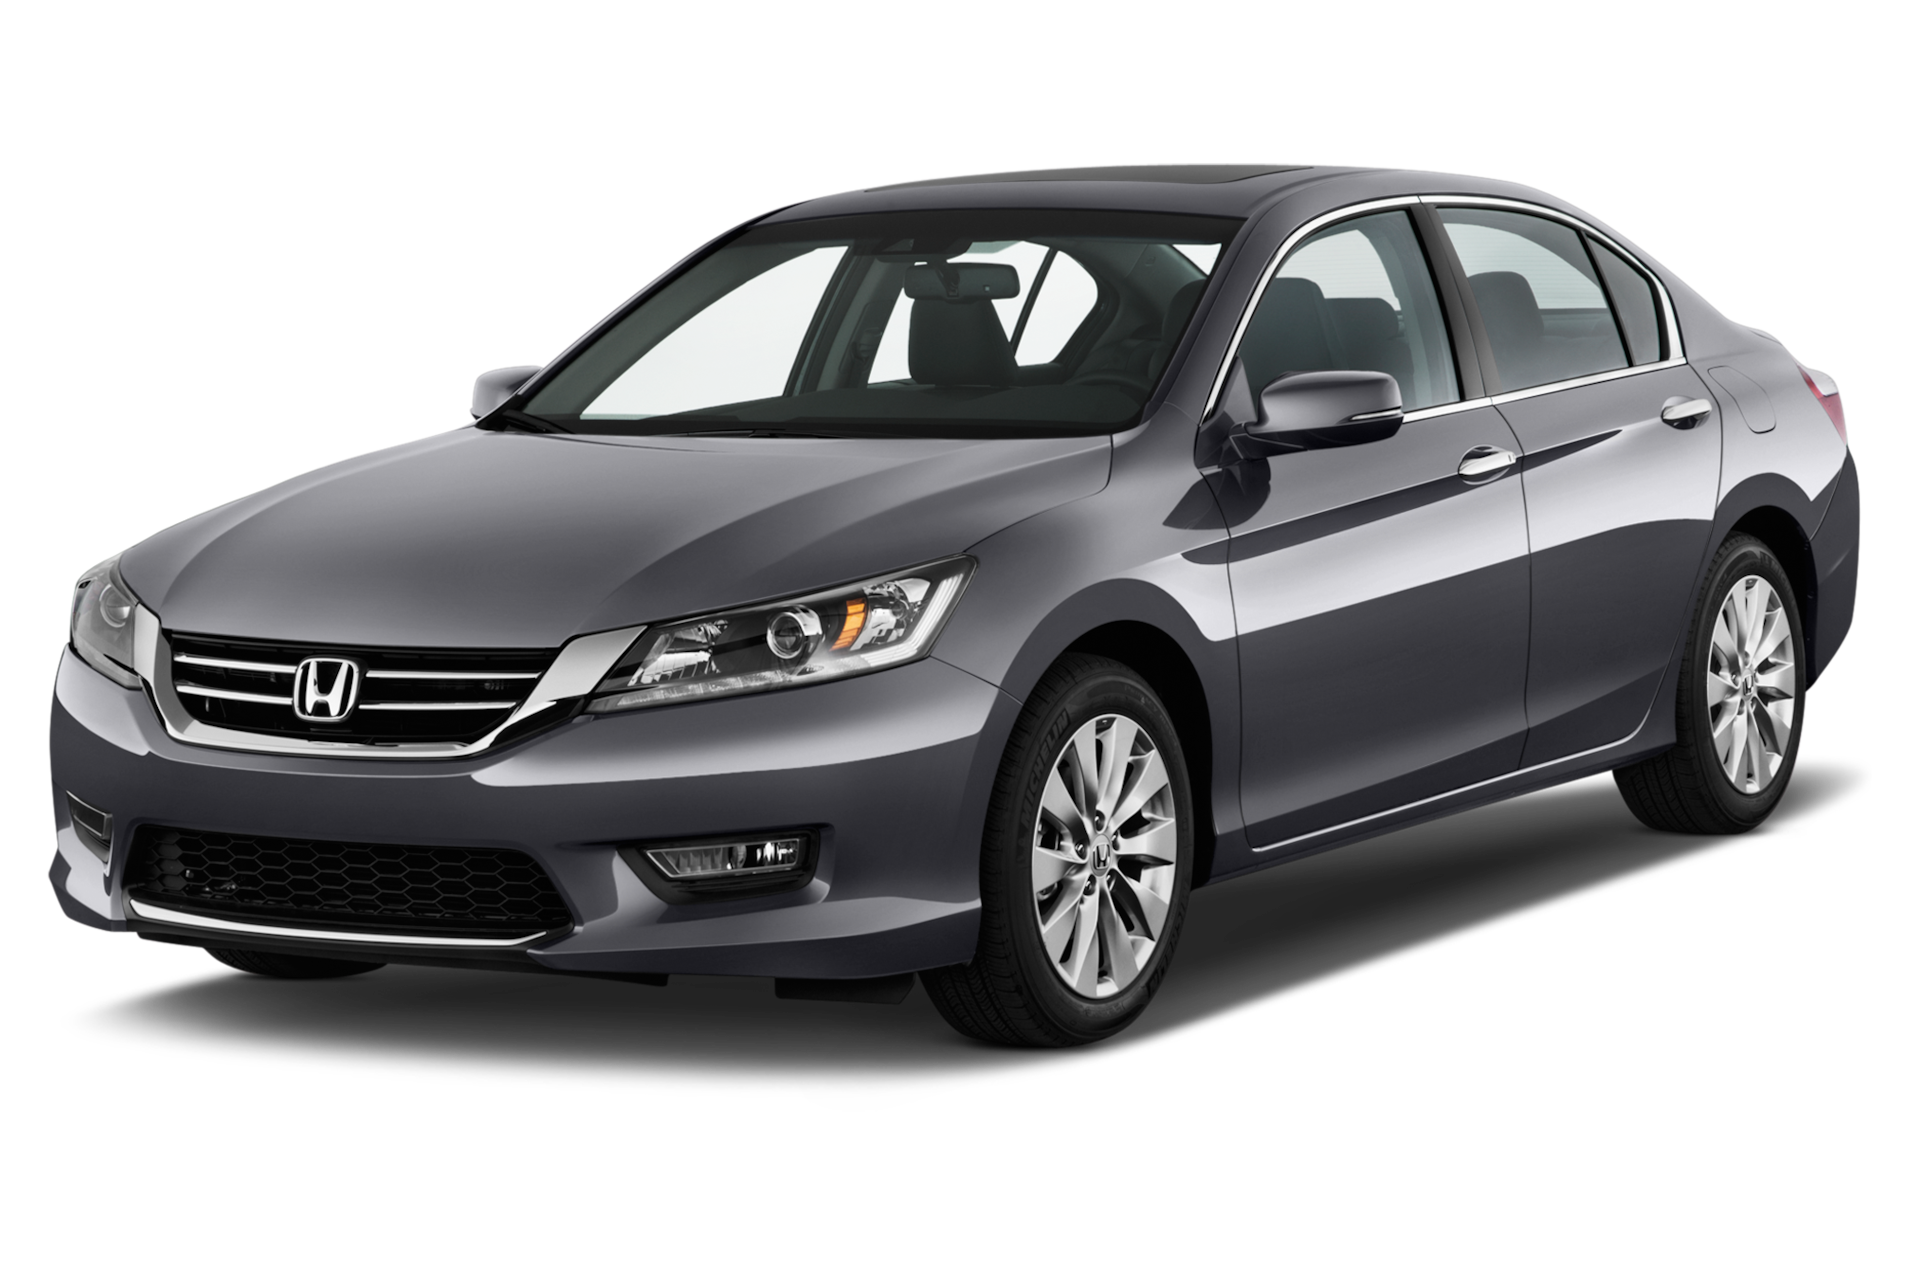 2013 Honda Accord Prices, Reviews, and Photos - MotorTrend